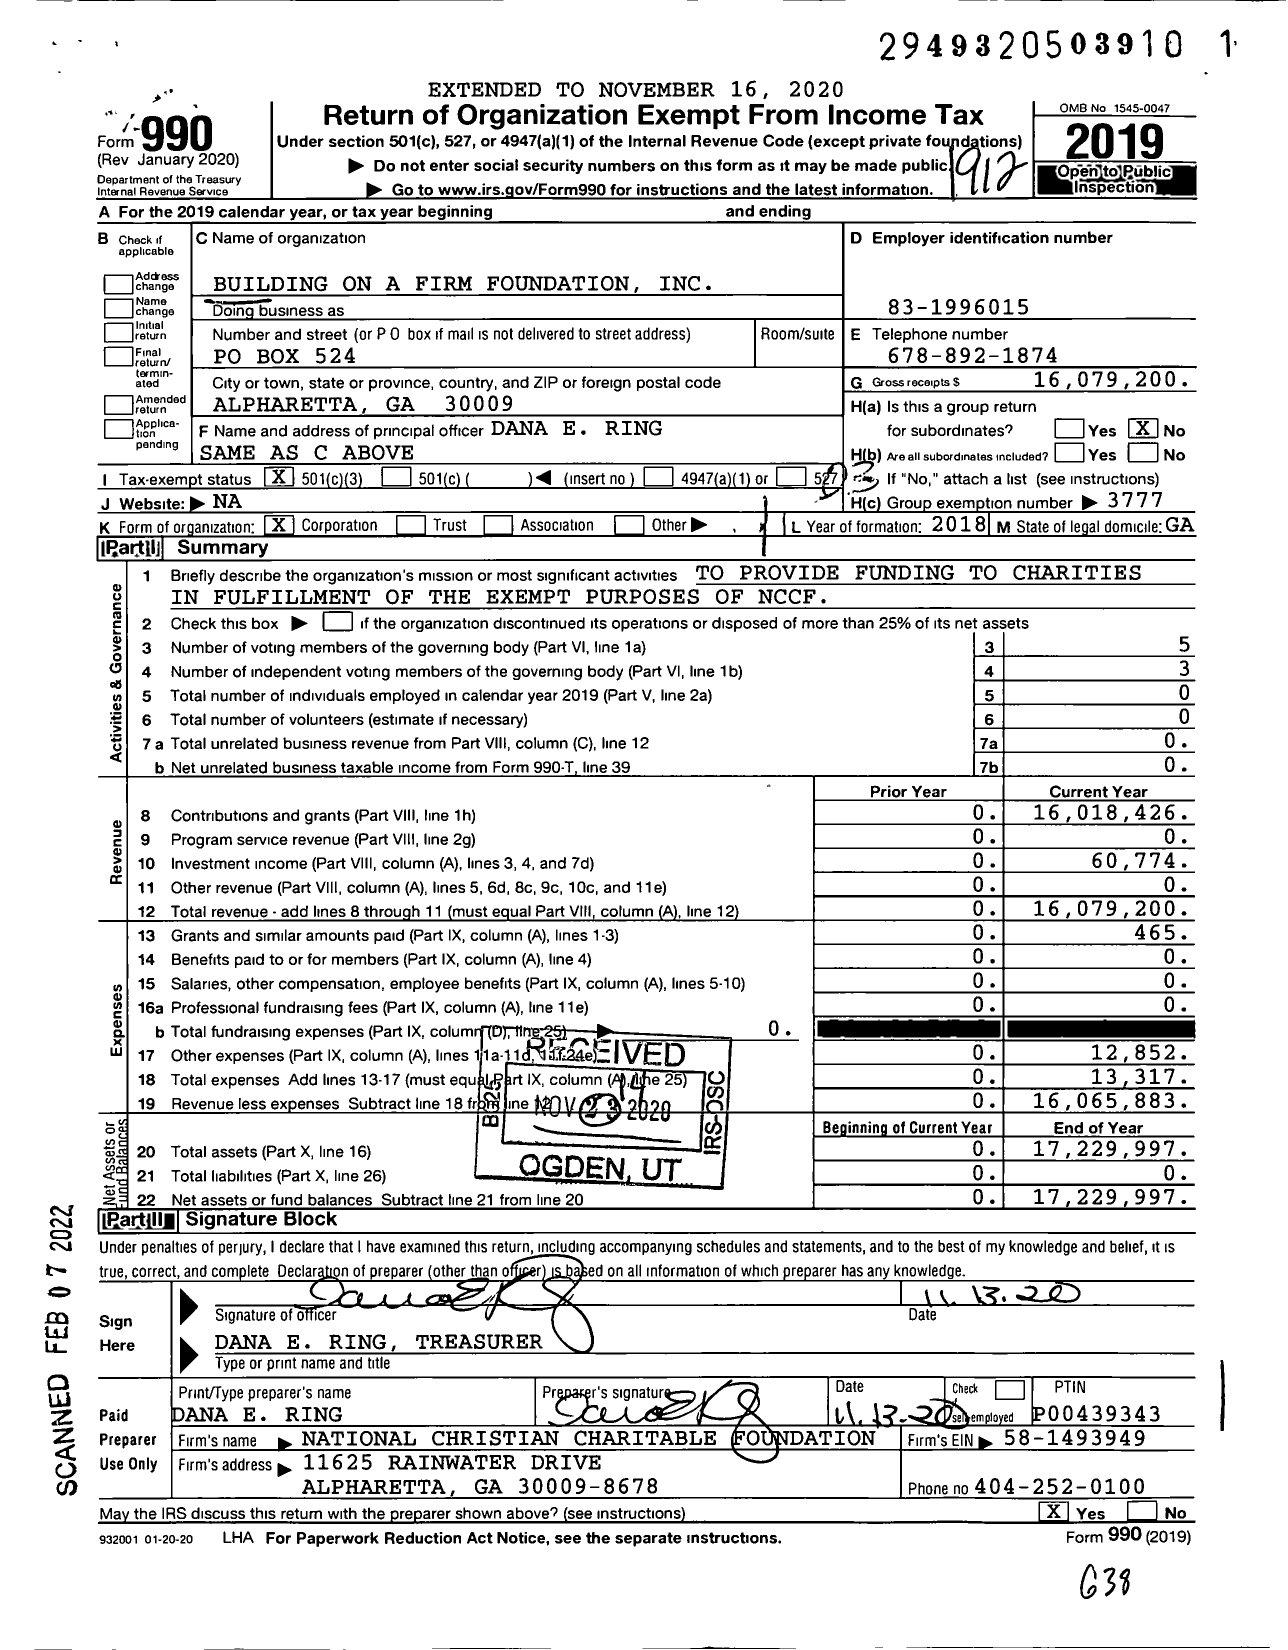 Image of first page of 2019 Form 990 for Building on A Firm Foundation